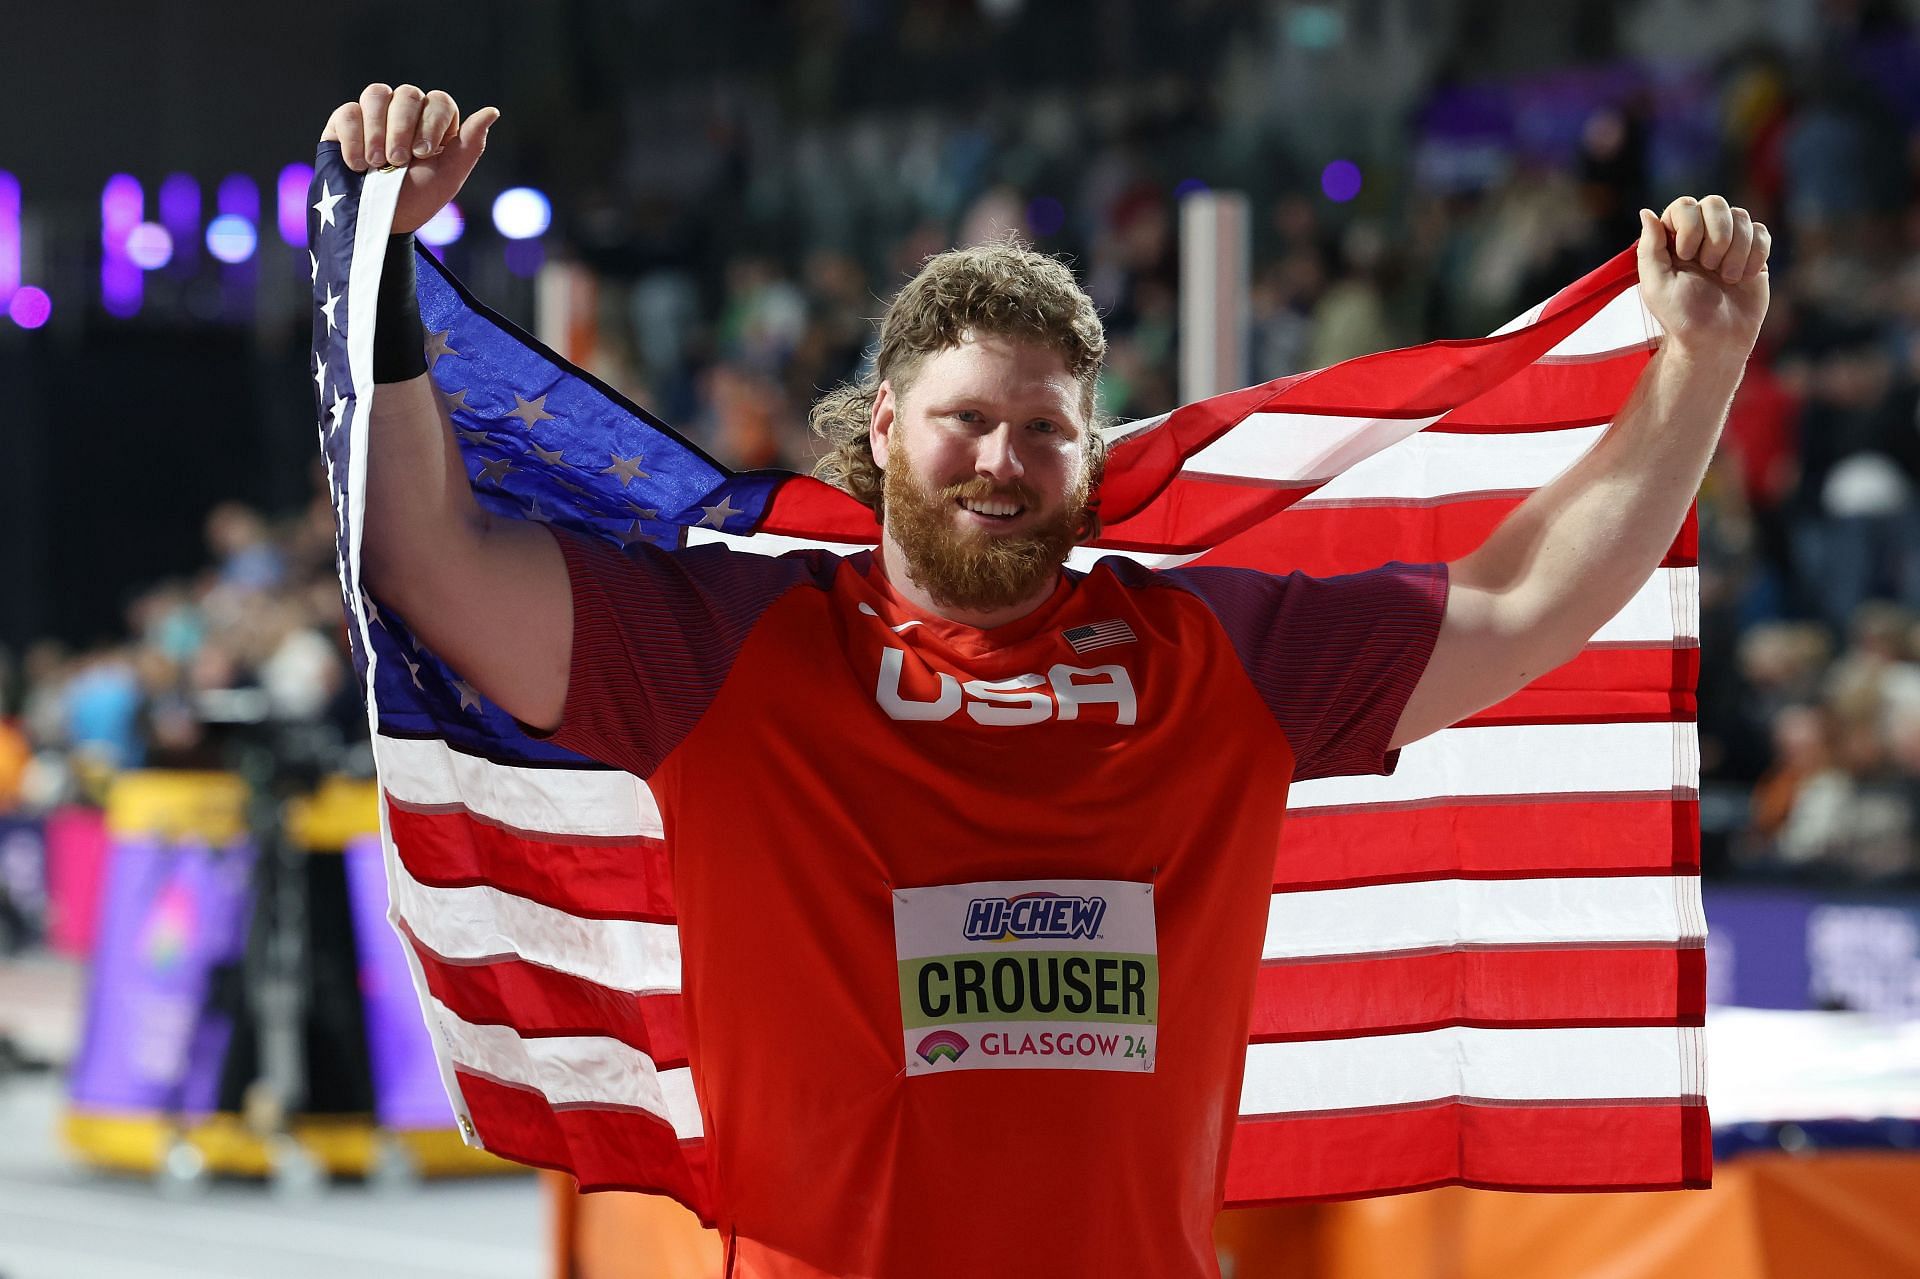 Ryan Crouser poses for a photo after winning the Men&#039;s Shot Put Final at the World Athletics Indoor Championships in Glasgow, Scotland.